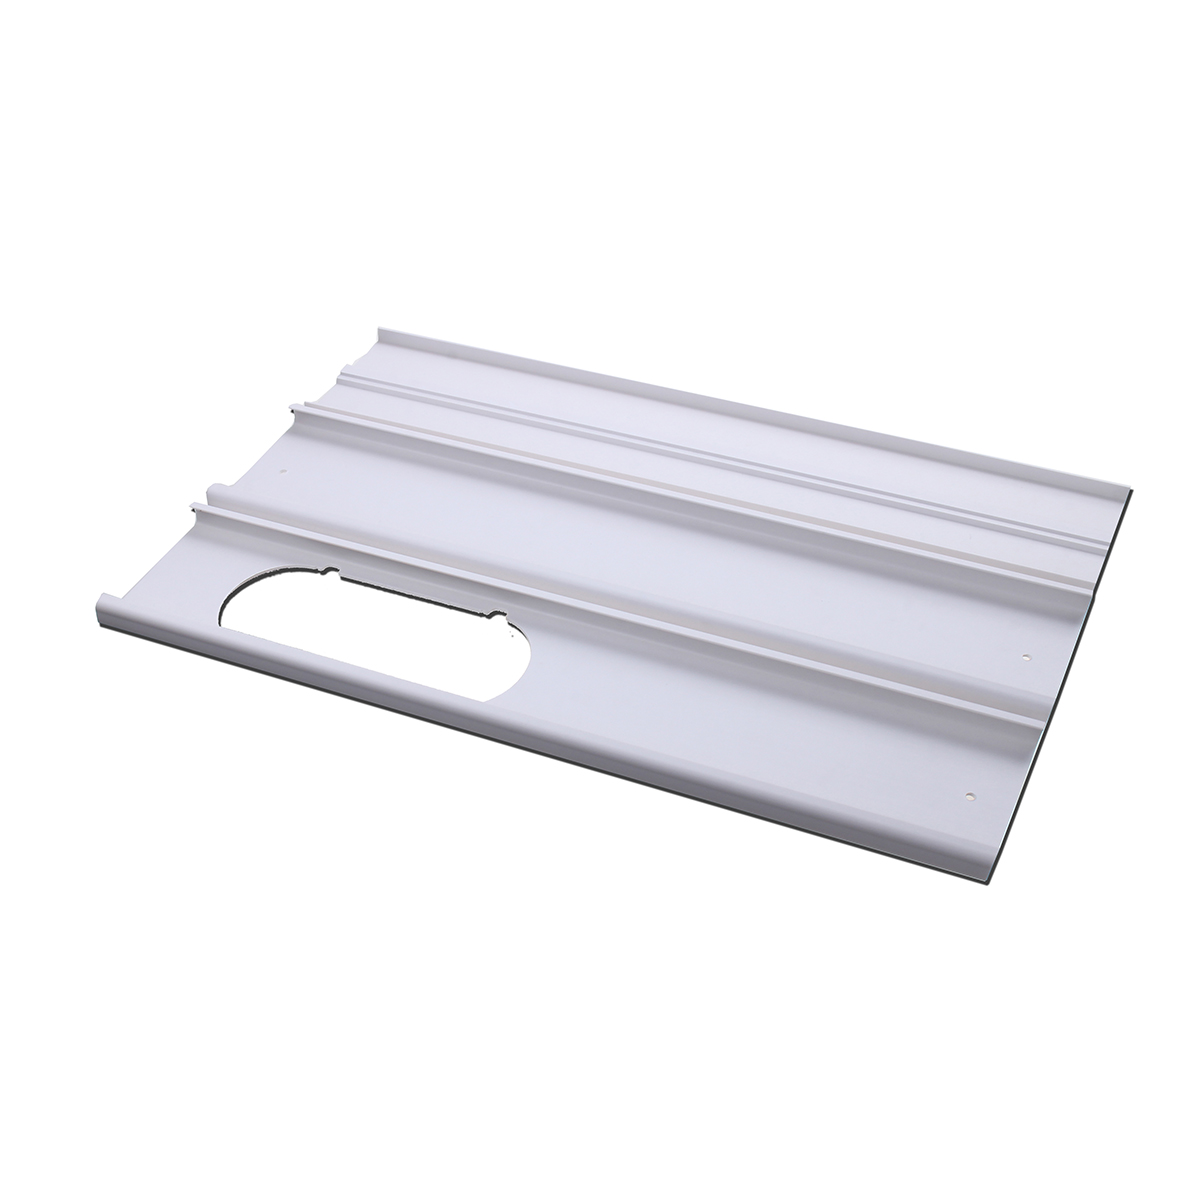 3Pcs-55-165cm-Adjustable-Window-Slide-Kit-Plate-Air-Conditioner-Wind-Shield-For-Portable-Air-Conditi-1632431-3